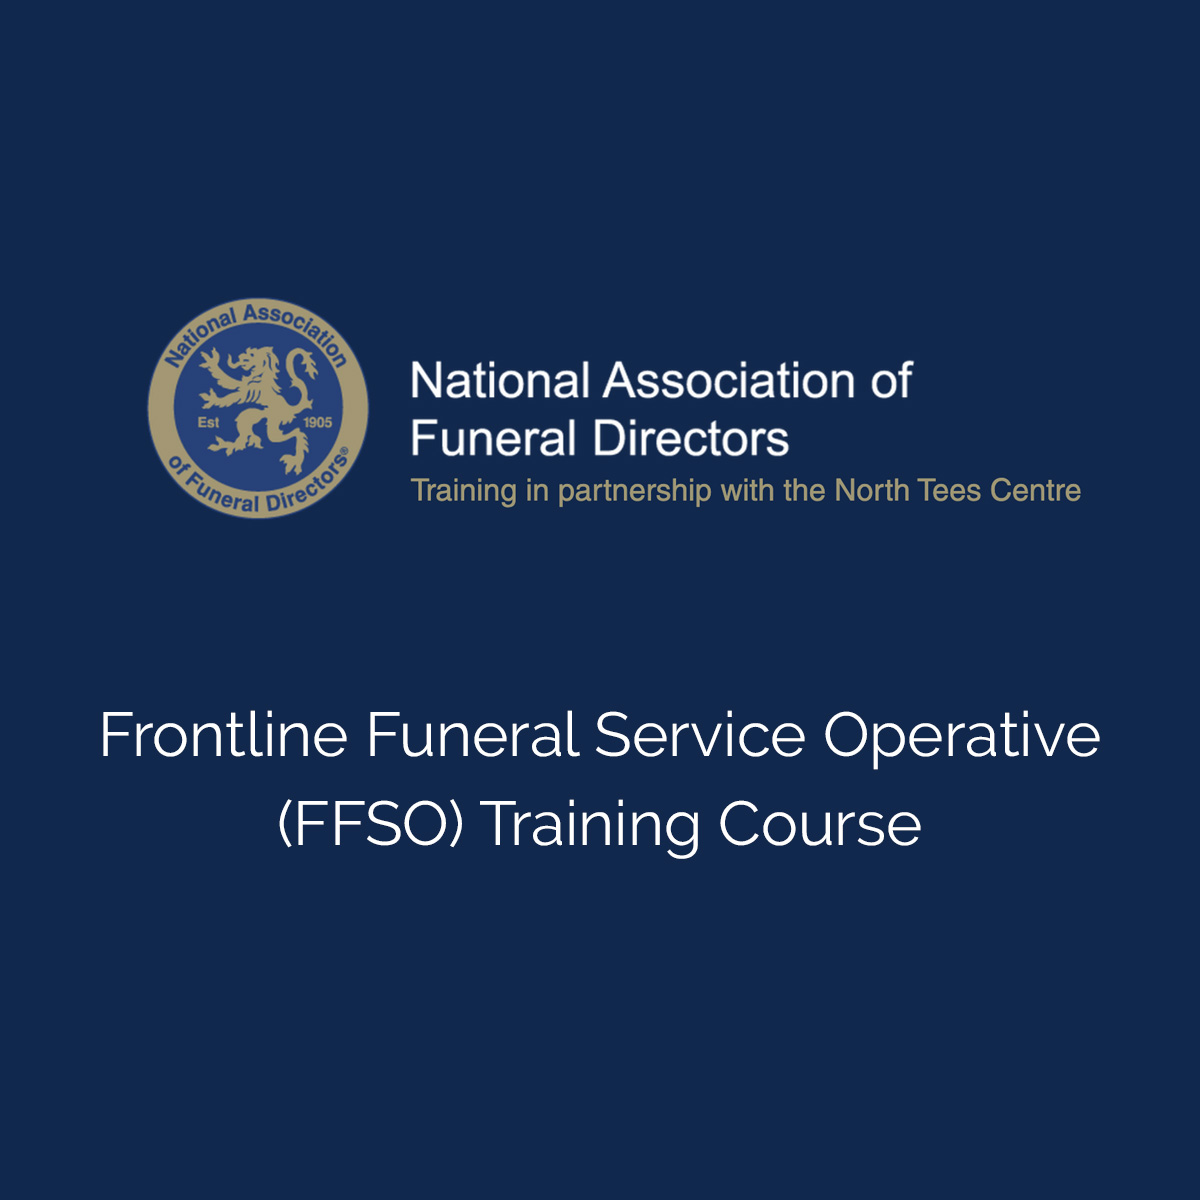 Funeral Service Operative (FFSO) Training Course